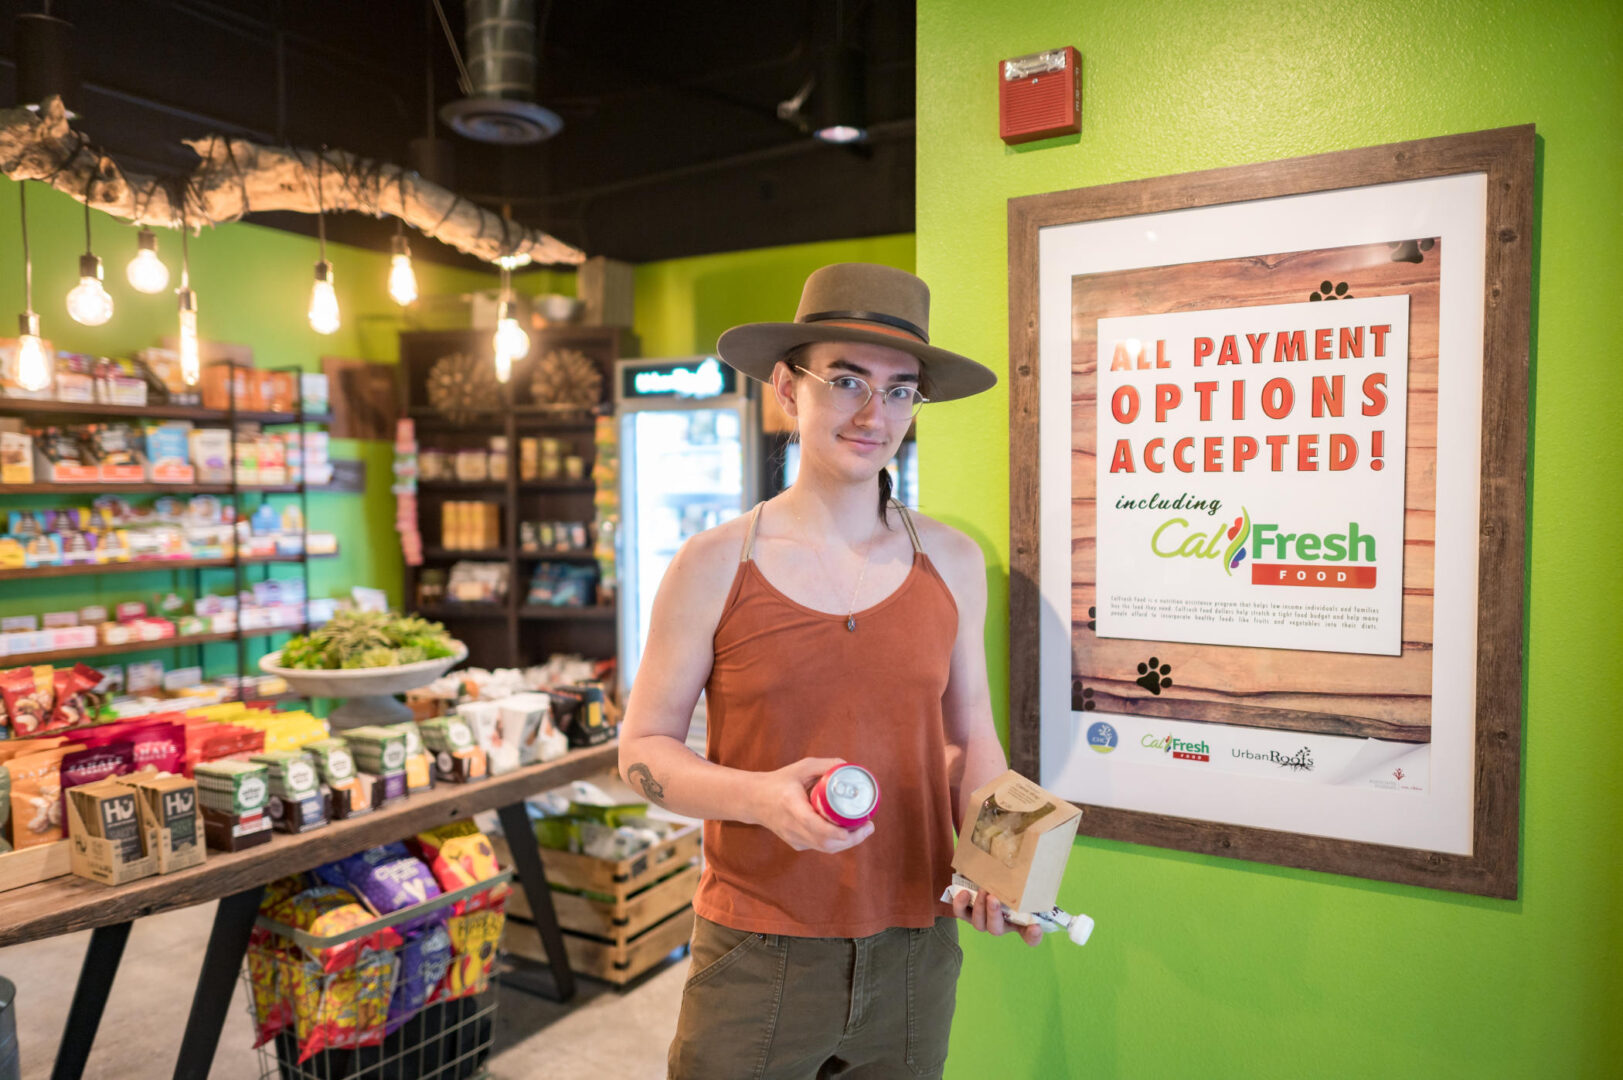 Isa Cooks holds a drink and food items in hands while standing at the entrance of a small market and next to a poster that reads "All Payment Options Accepted. Including CalFresh."